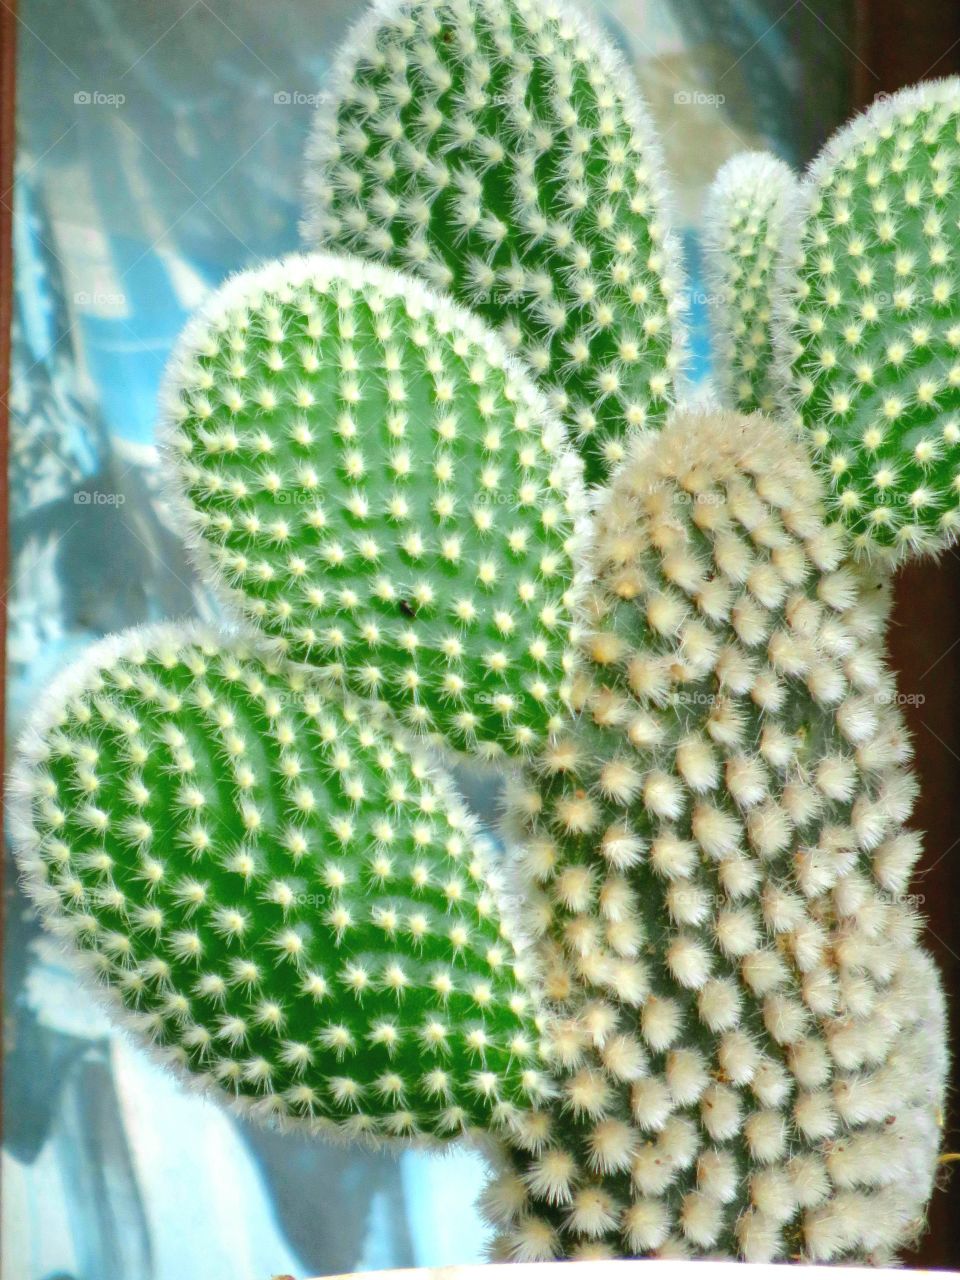 Cactus is green.